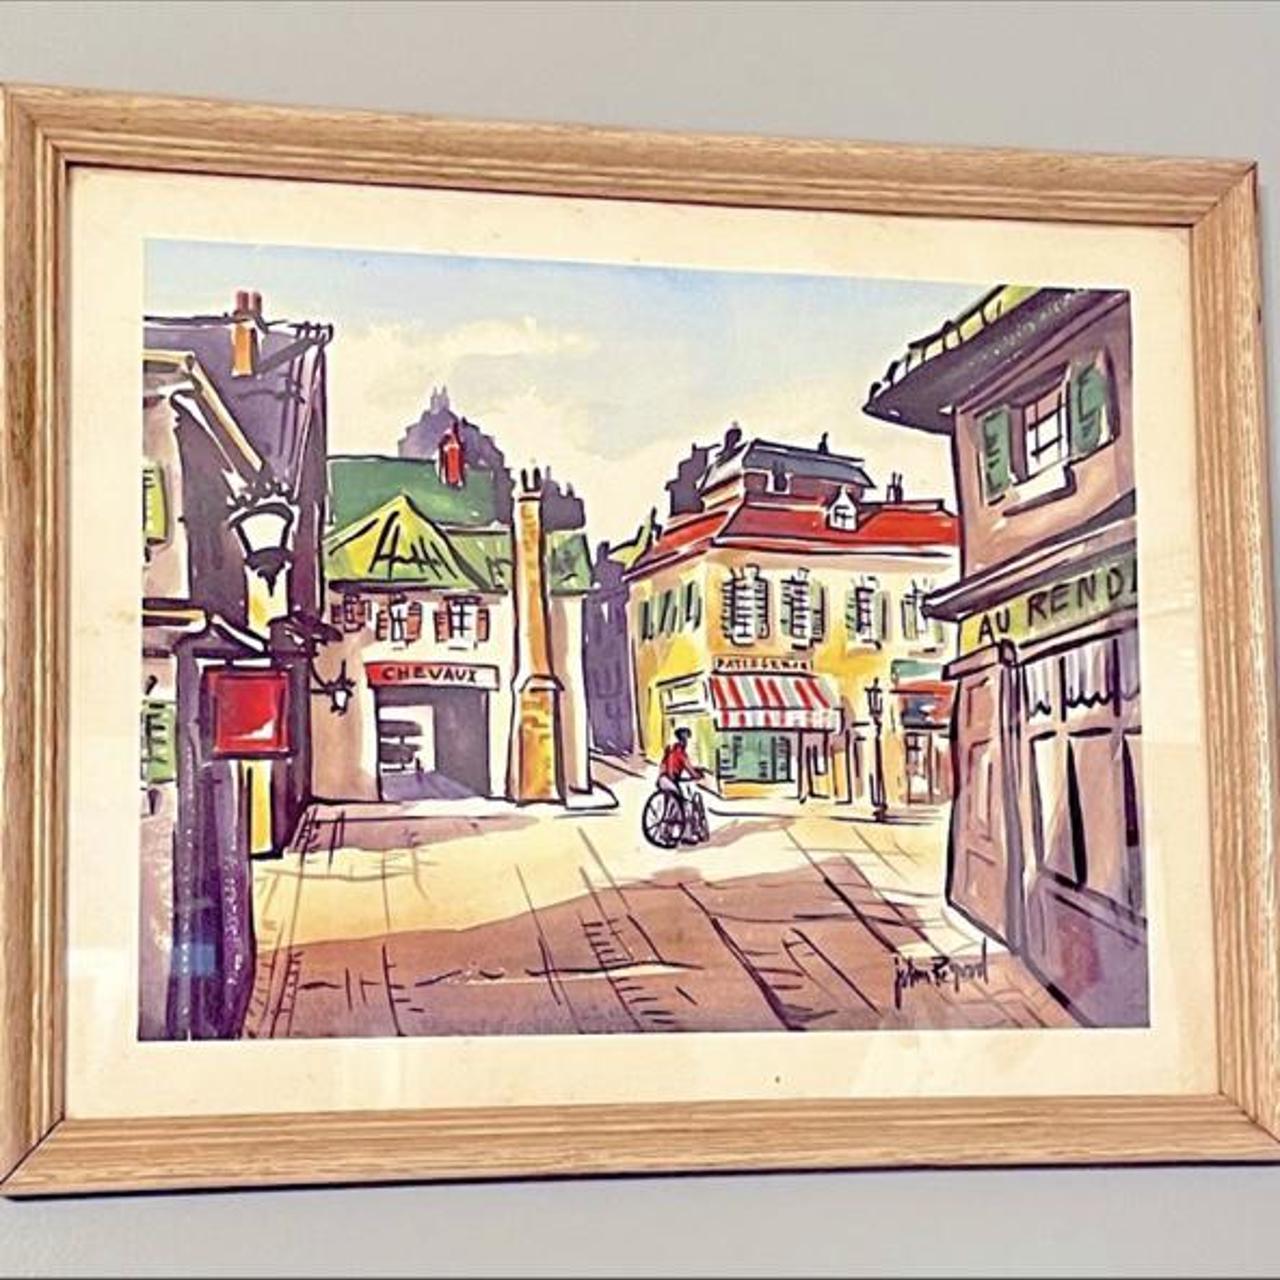 Product Image 1 - ▪️Vintage French Street Watercolor Print▪️
Vintage